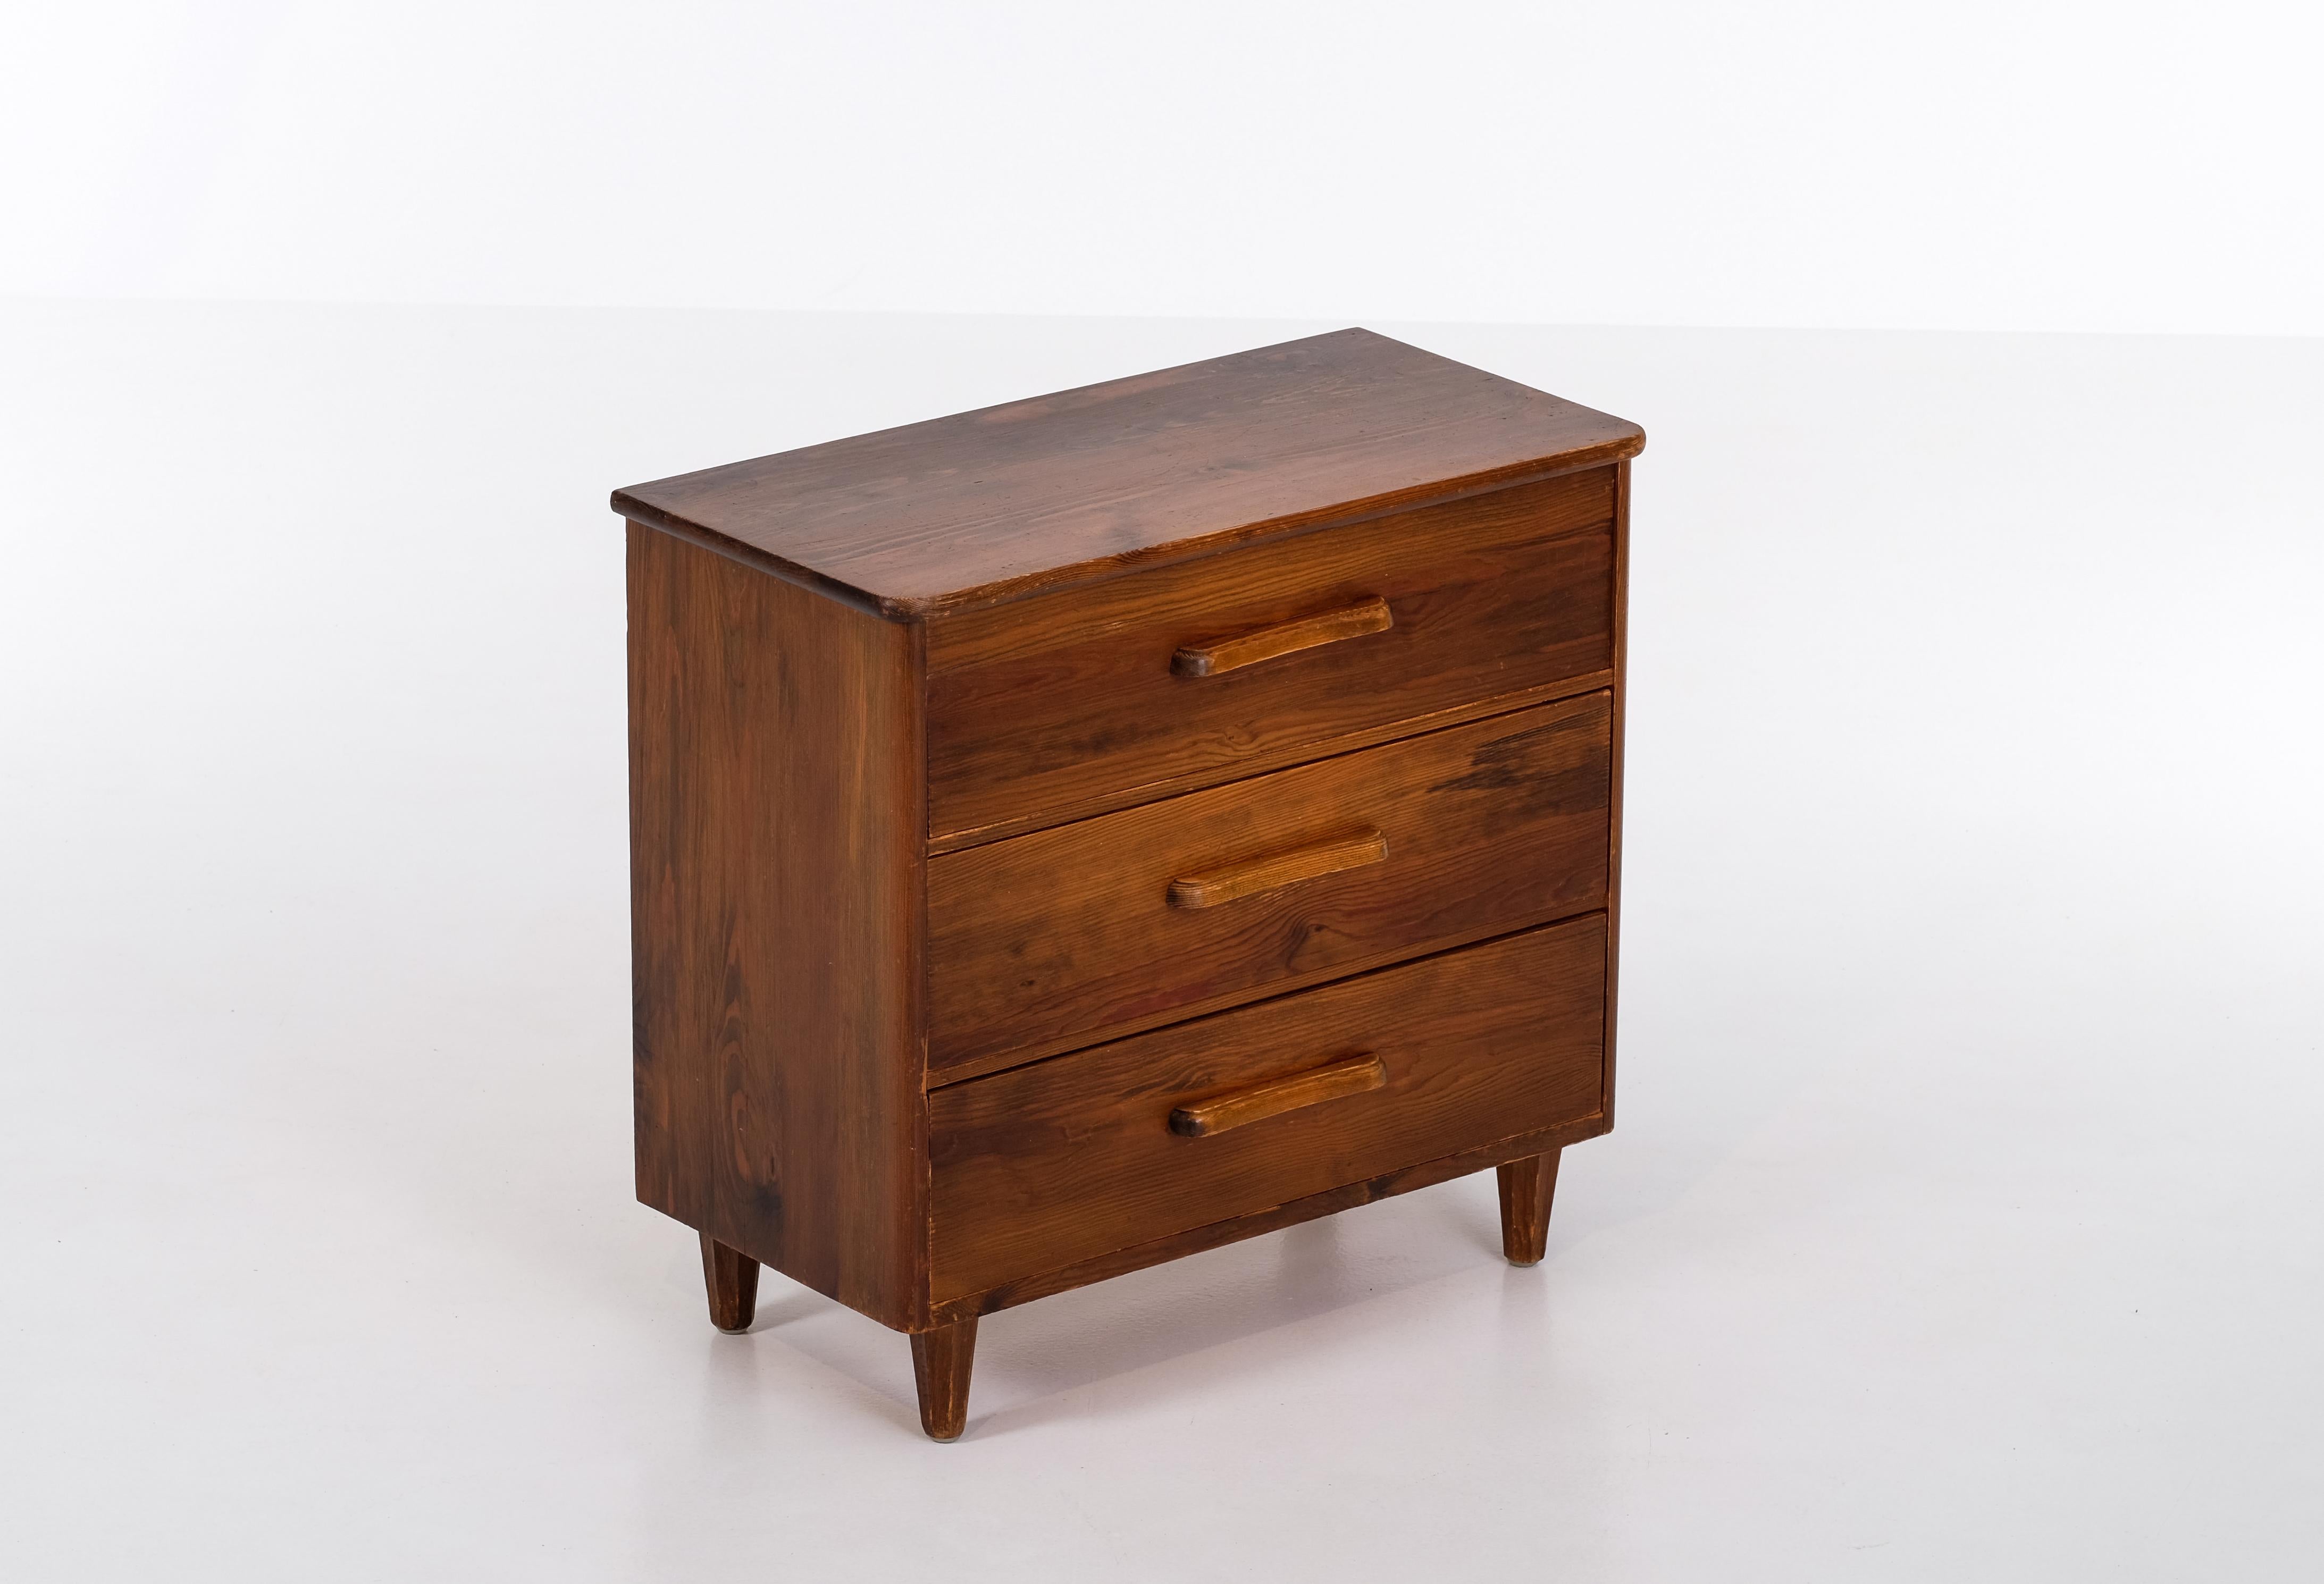 Rare Swedish bureau / chest of drawers in dark stained pine. Produced in Sweden, 1940s.
